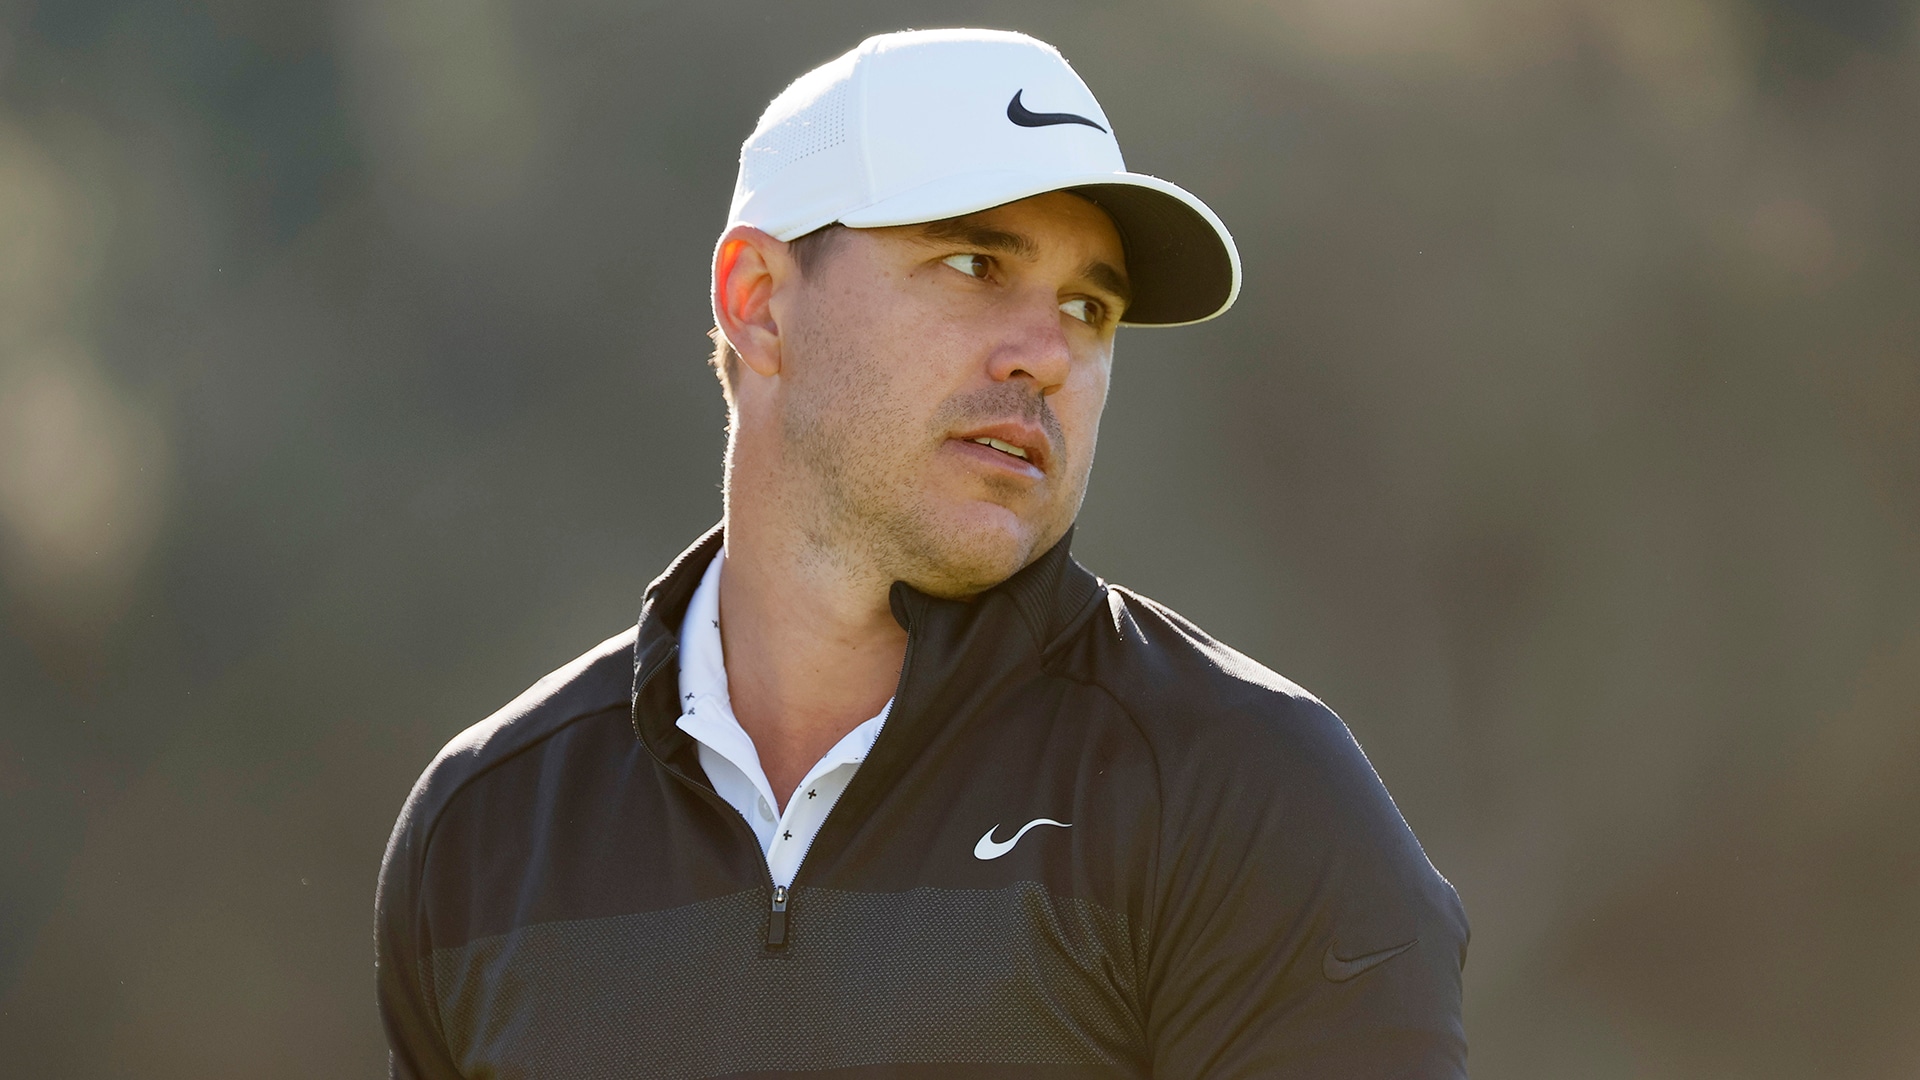 ‘It’s a miracle’: Brooks Koepka thrilled to have neck pain gone